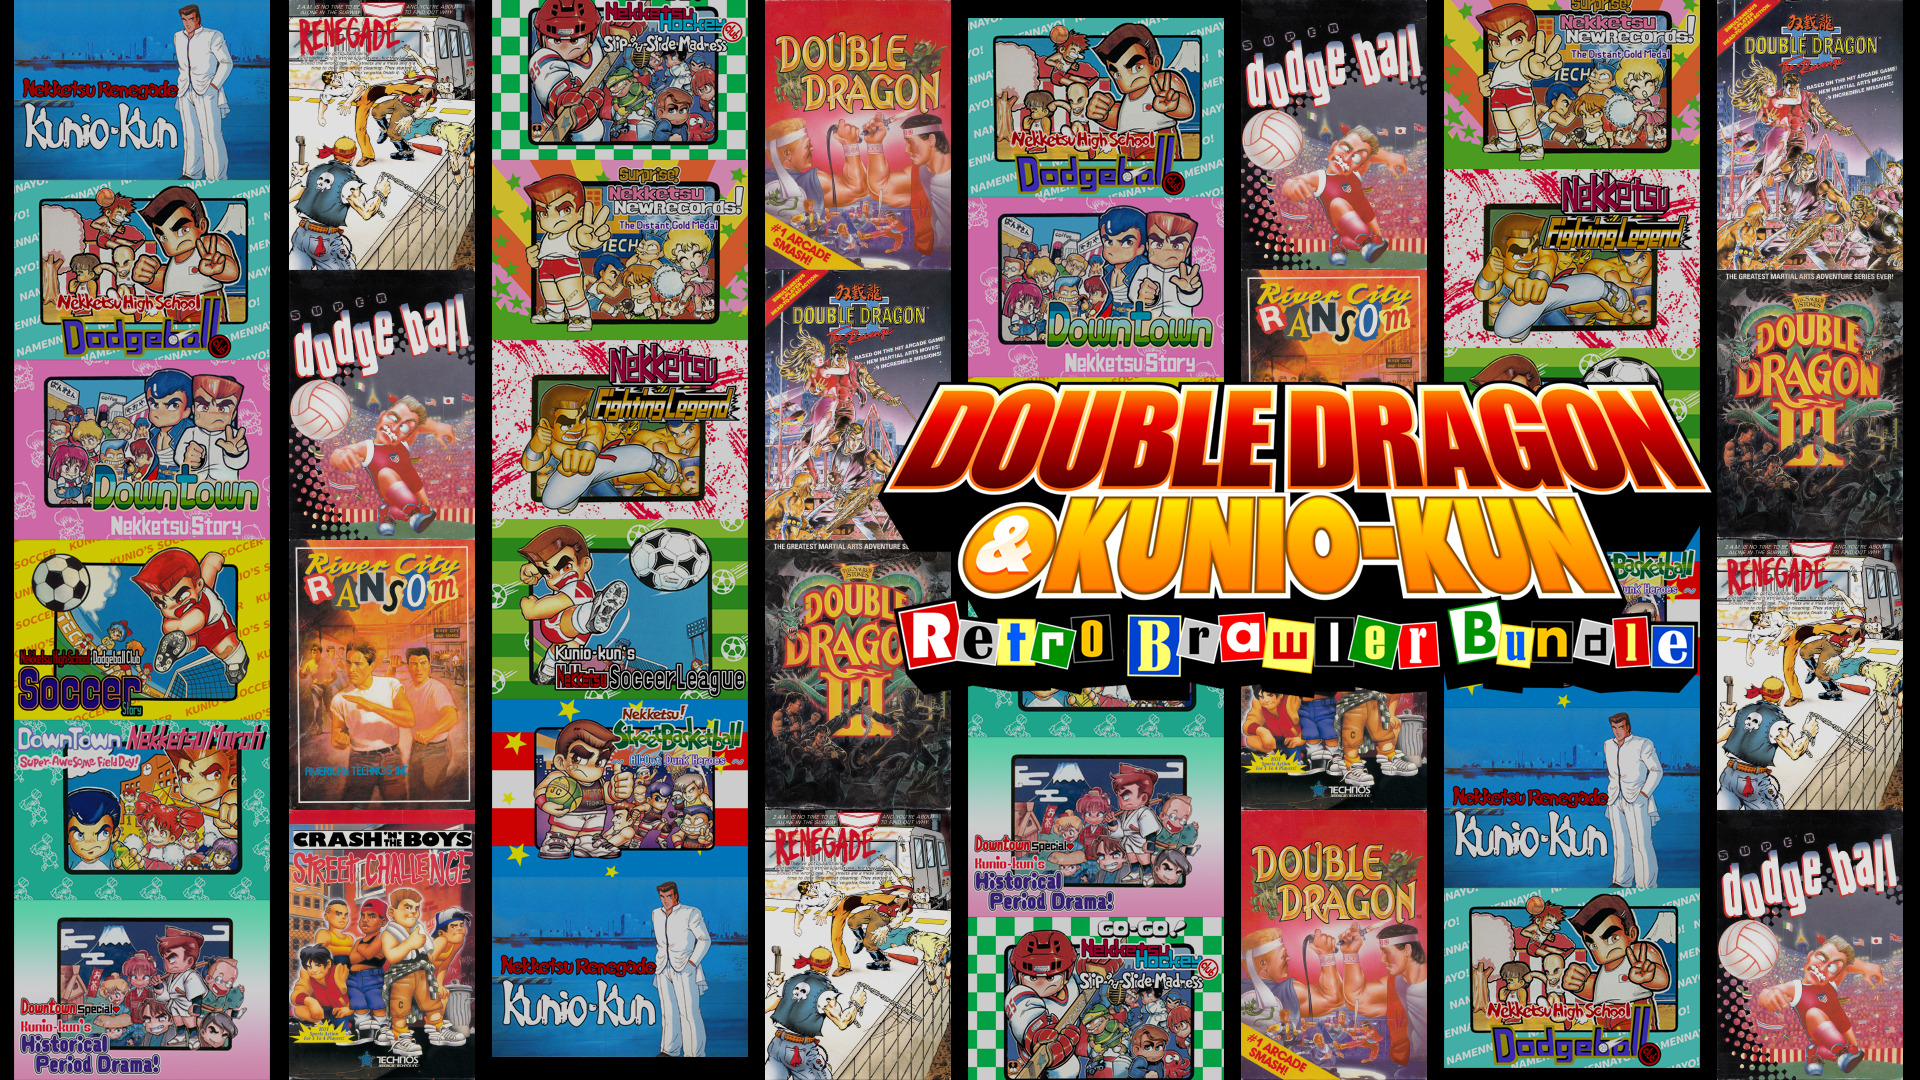 Double Dragon Series - [ COLLECTIONS ] - Mugen Free For All